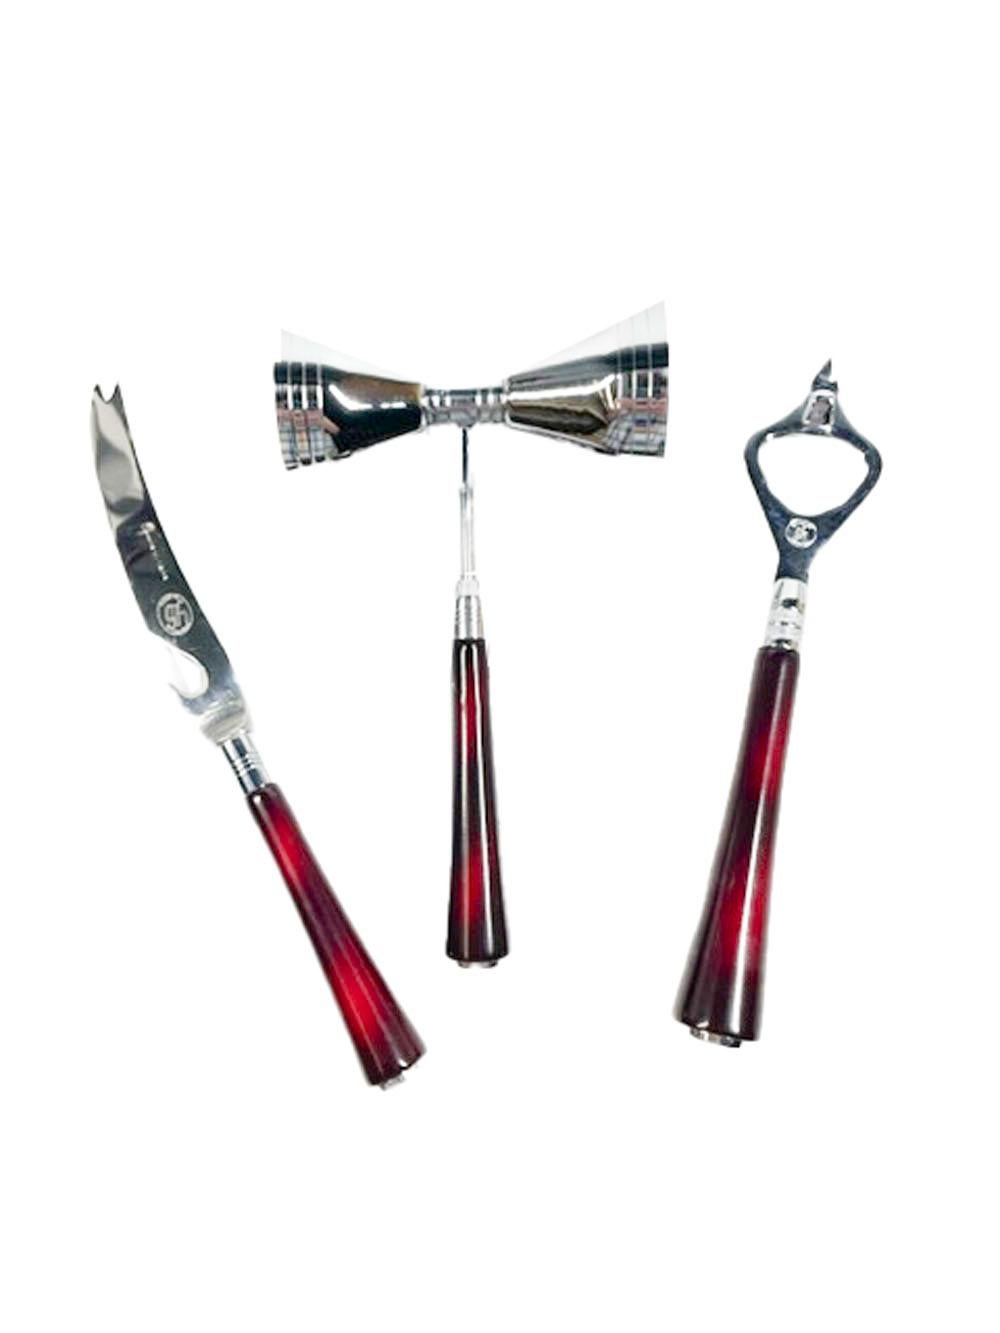 Glo-Hill 6 Piece Bar Tool Set with Carousel Stand in Cherry Bakelite and Chrome For Sale 1